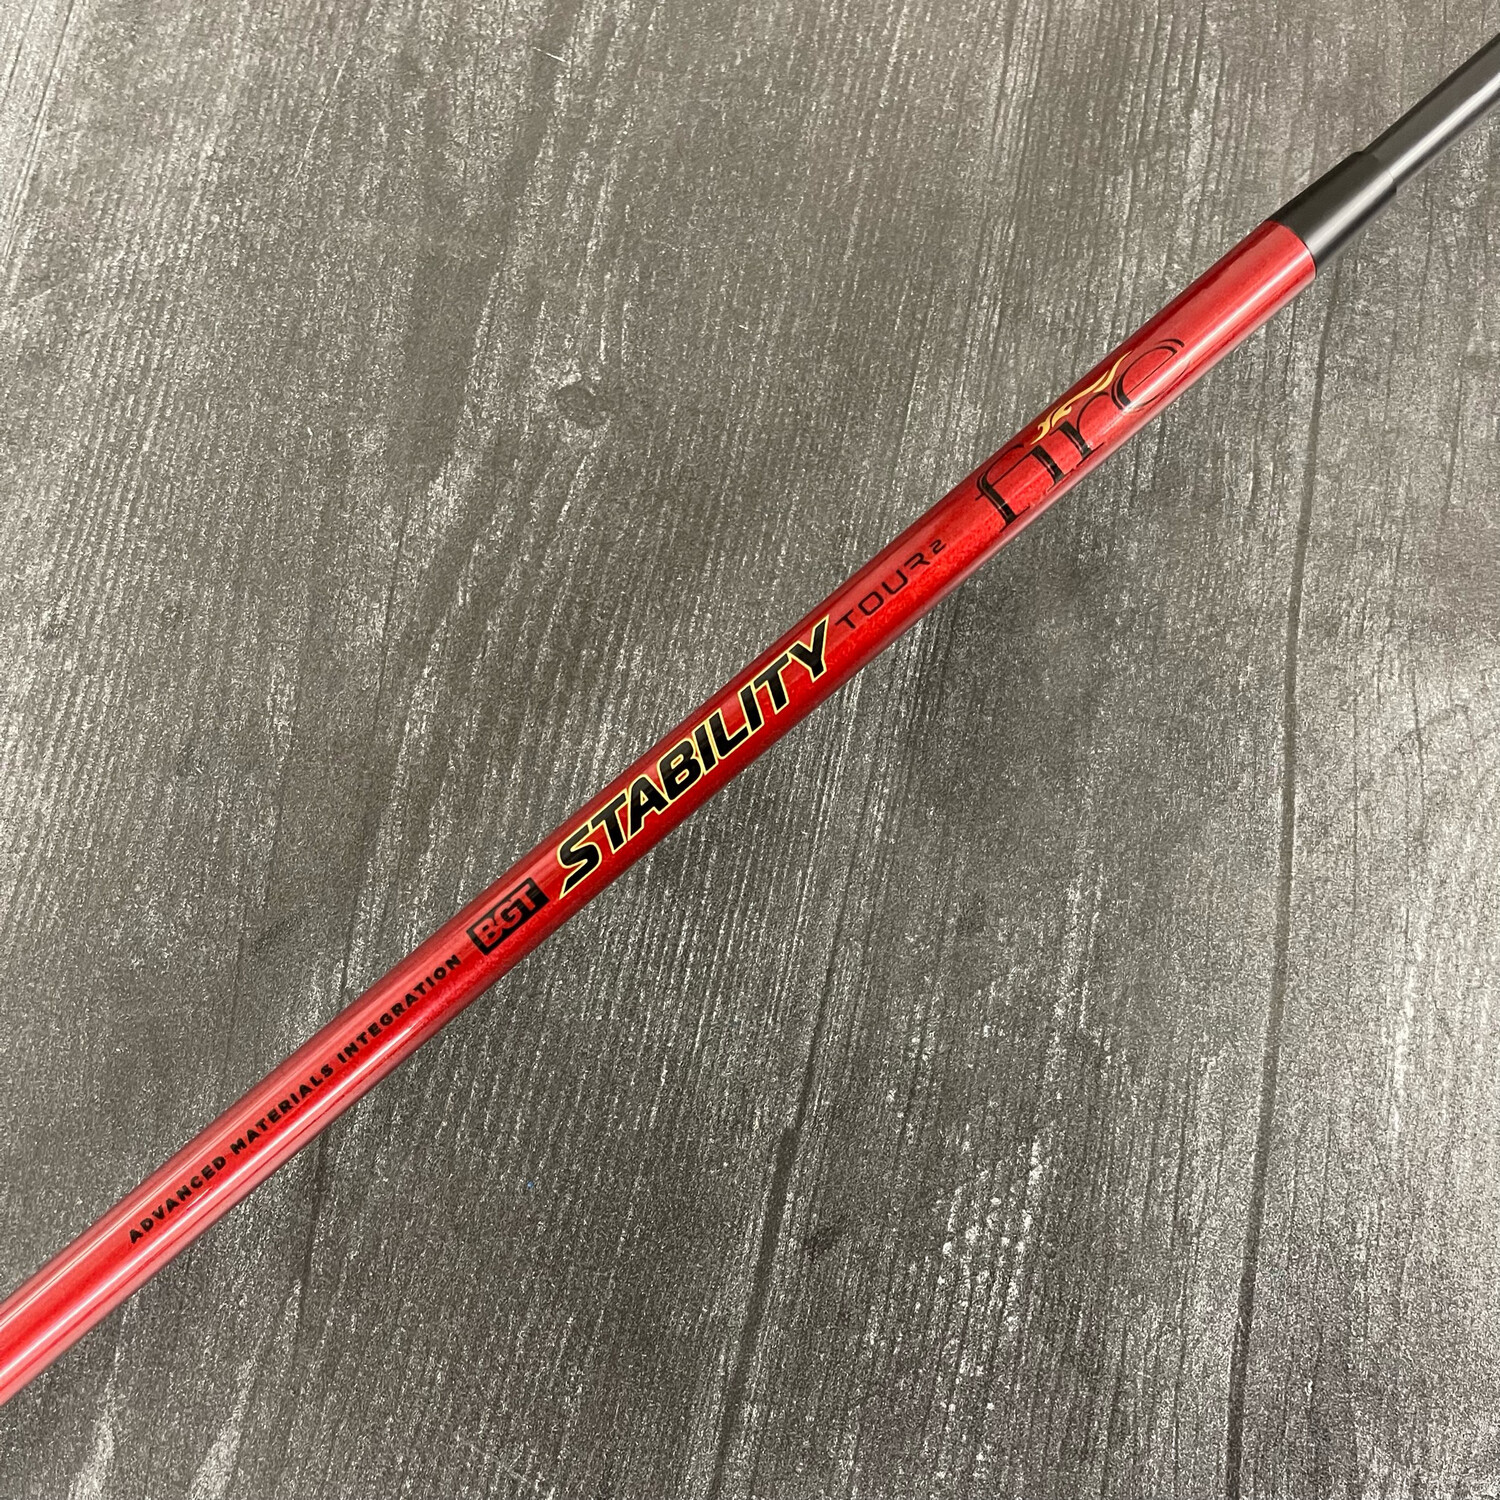 Limited Edition Fire Red Tour Stability Shaft